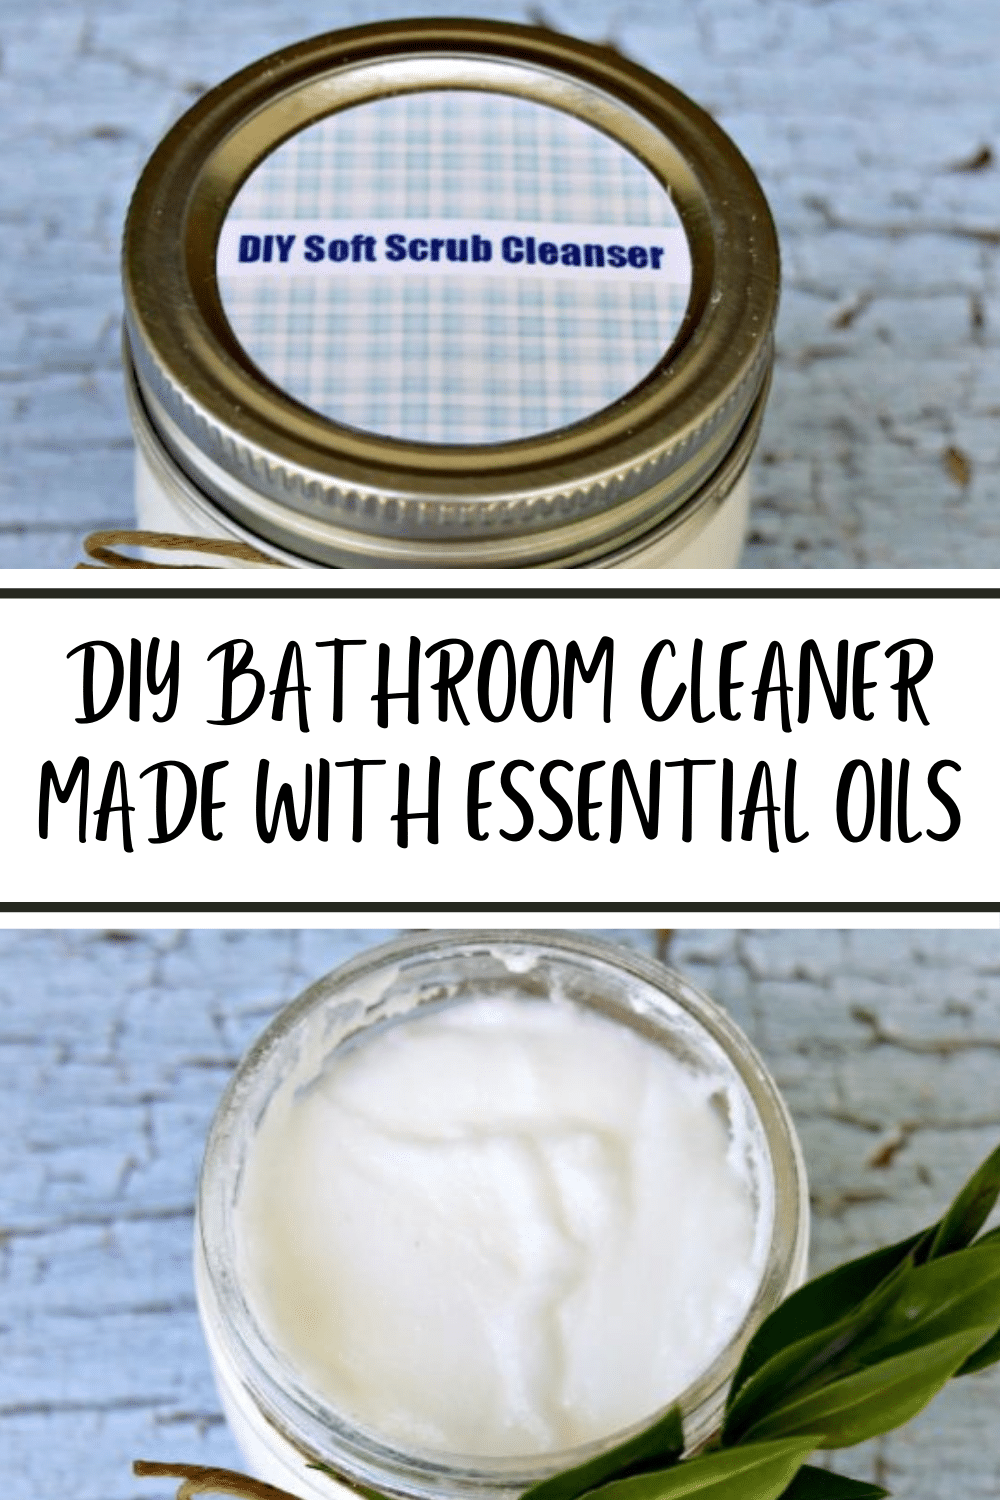 This DIY Bathroom Cleaner is so quick to make using baking soda and essential oils and can be used for cleaning the bathroom, kitchen and other rooms. #diy #homemadecleaners #essentialoilrecipes via @wondermomwannab